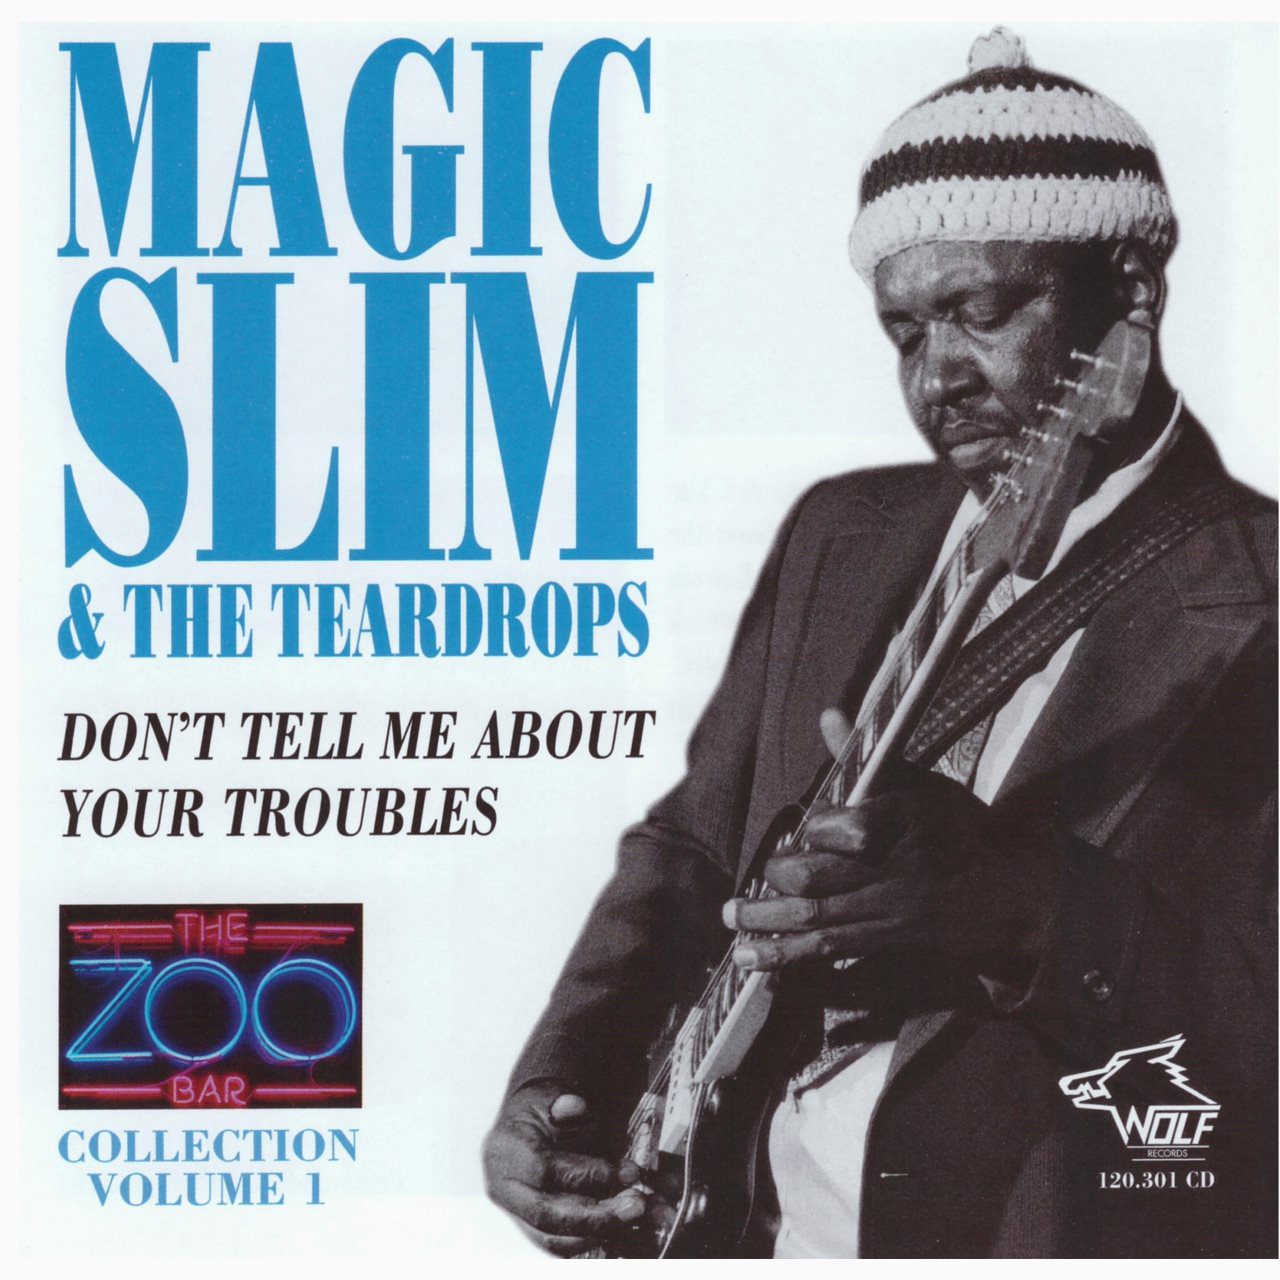 Magic Slim & Teardrops – Don’t Tell Me About Your Troubles cover album